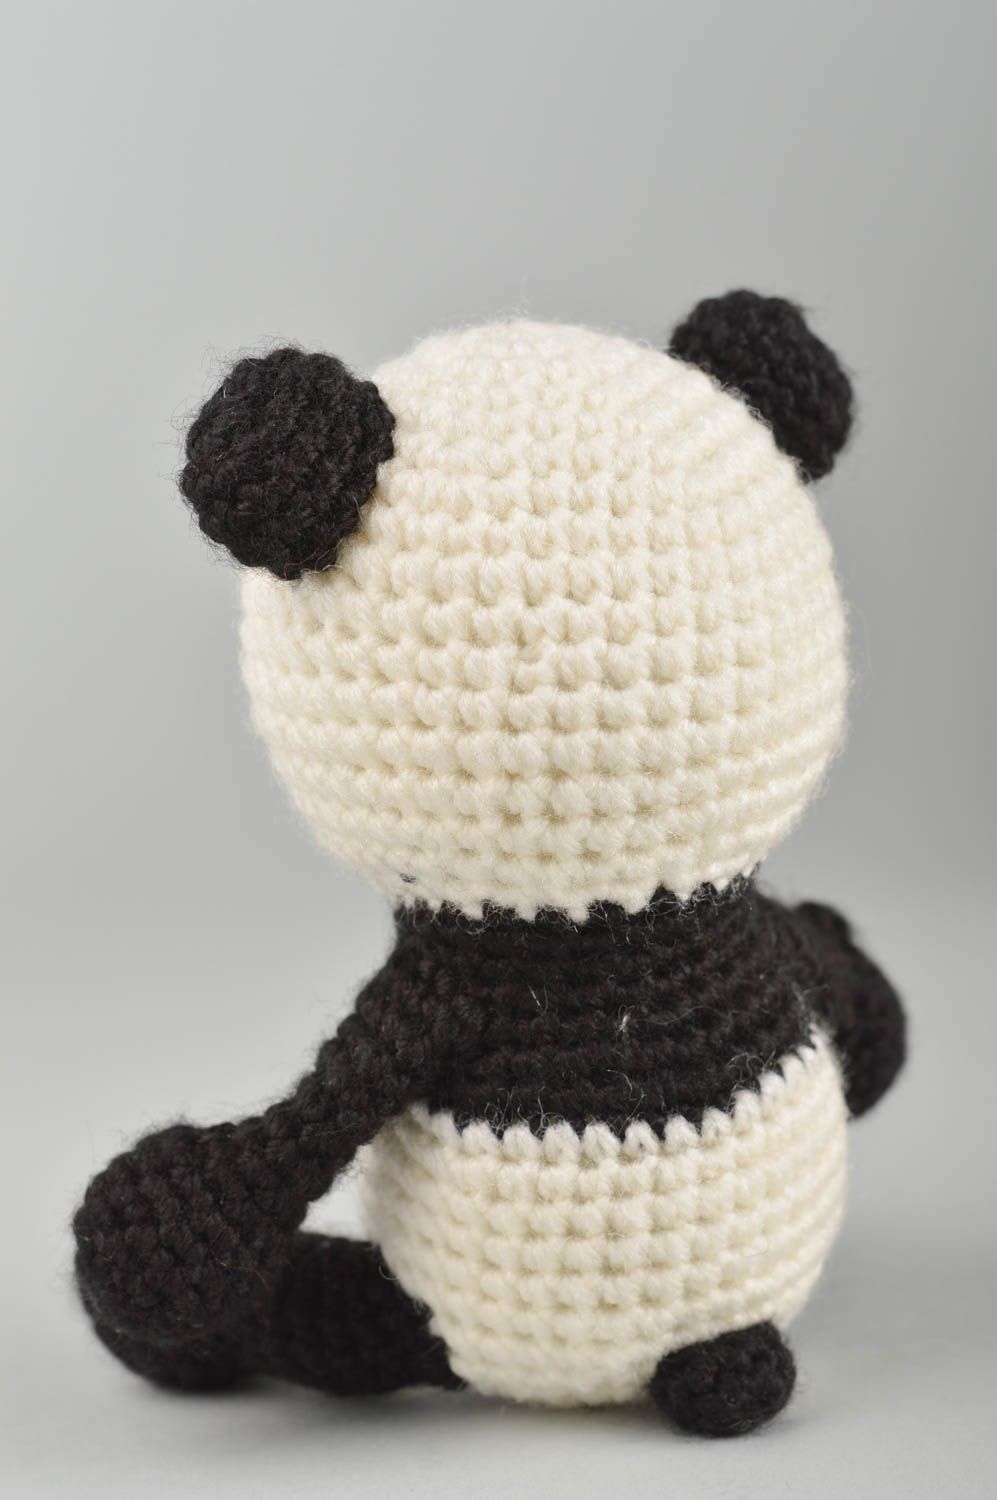 Handmade crocheted toy baby soft toy crocheted panda toy design crocheted toy   photo 3